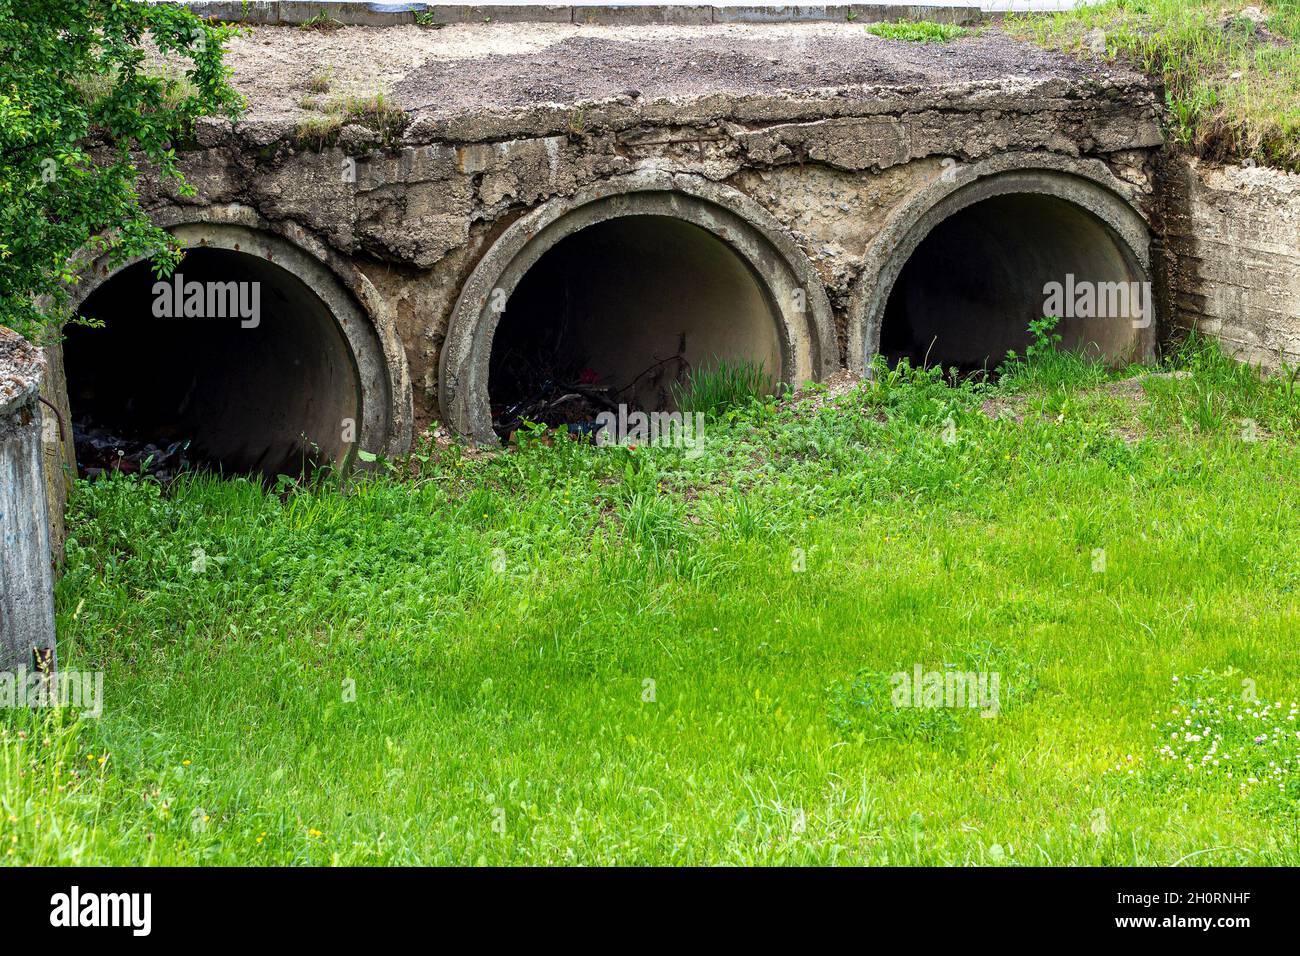 Big sewage drain pipe or effluent release wastewater into the sewage canal with green grass and litter around. Stock Photo